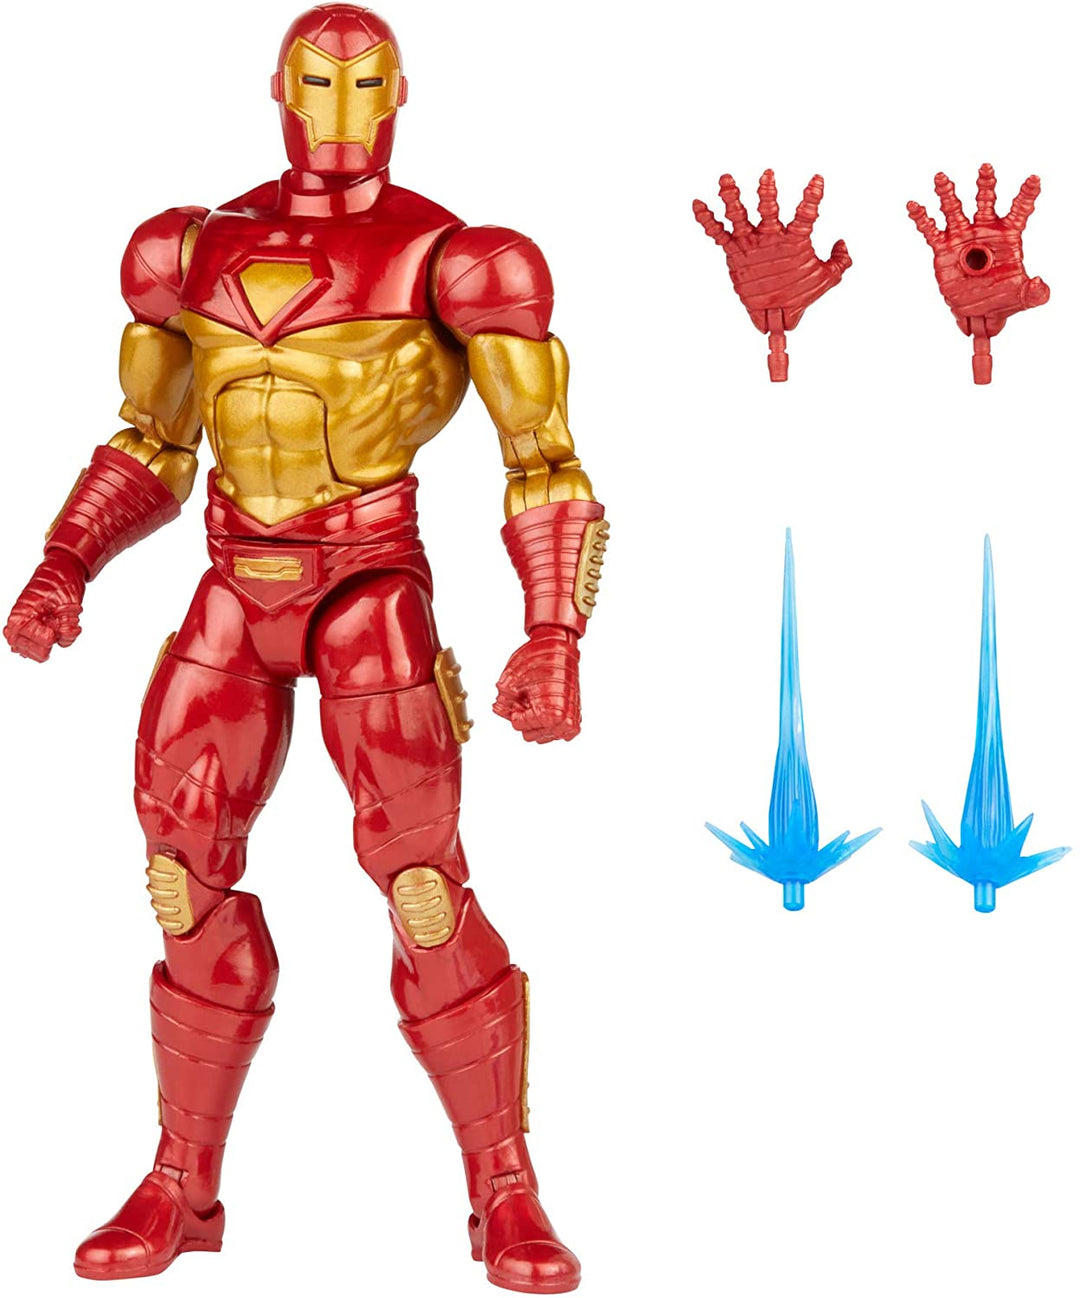 Hasbro Marvel Legends Series 6-inch Modular Iron Man Action Figure Toy, Includes 4 Accessories and 1 Build-A-Figure Part, Premium Design and Articulation Multicolor, F0355 Multicolor, F0355